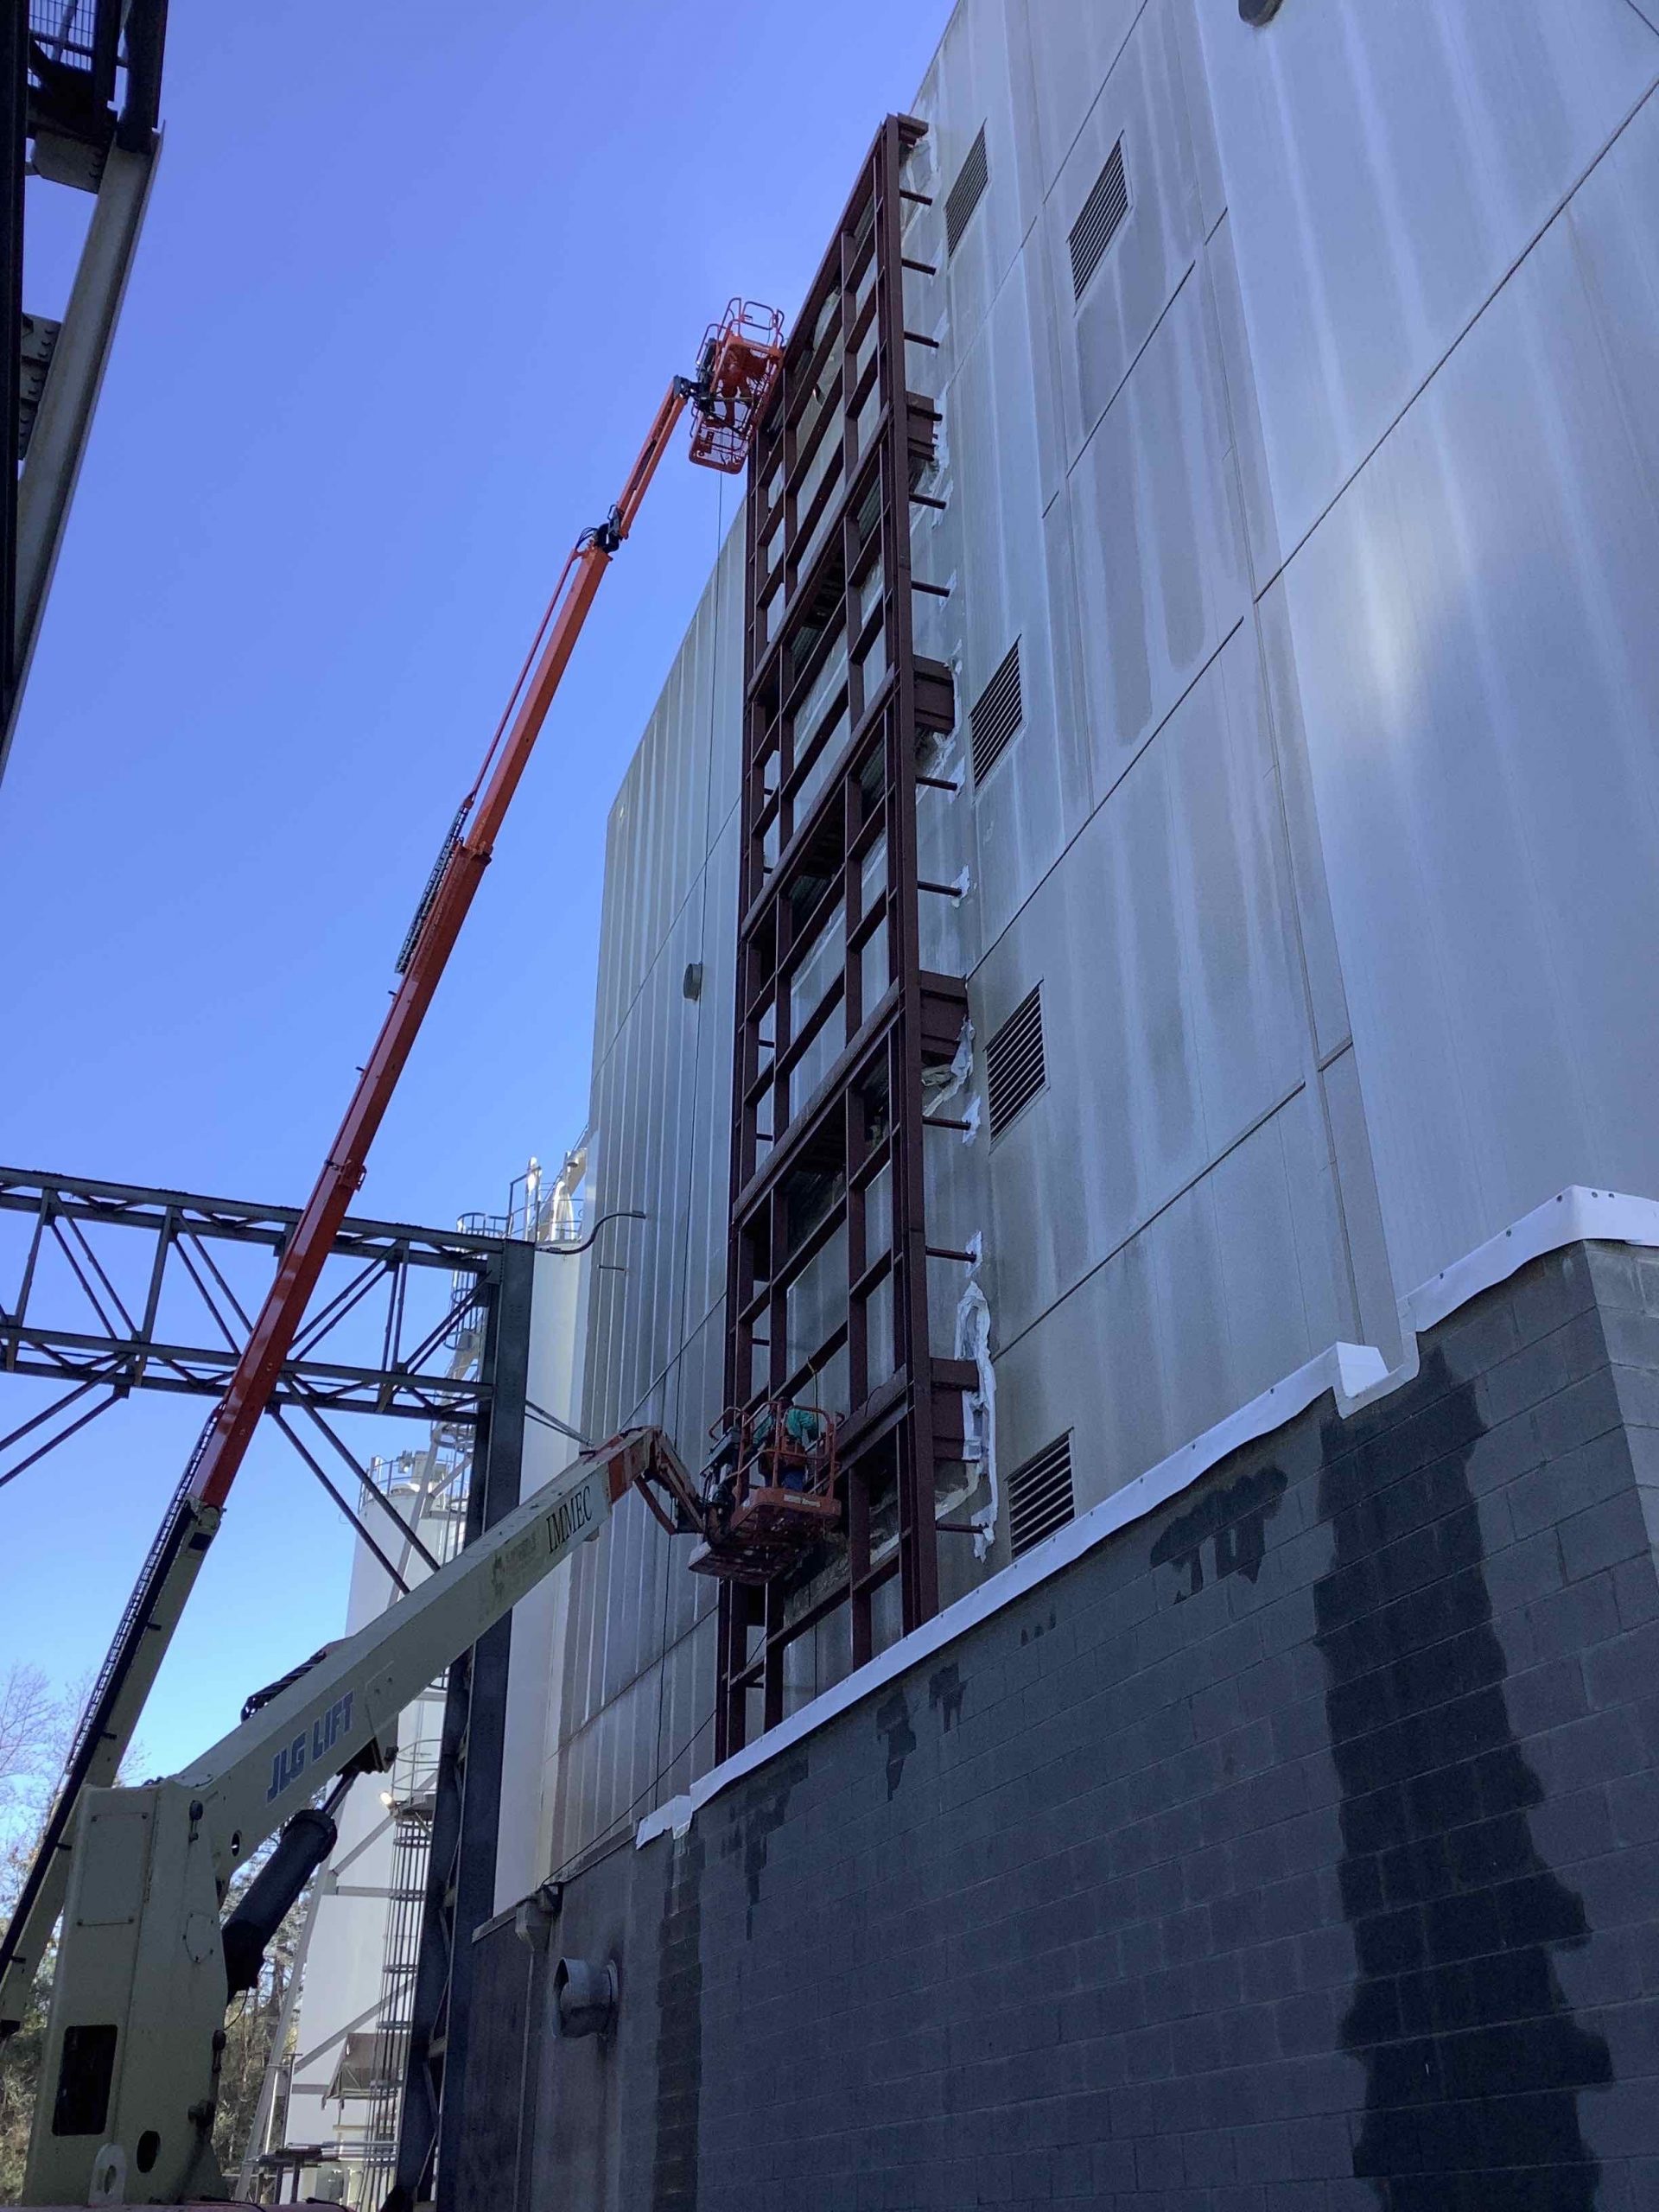 Good Harvest Grains – Grain Moving Tower (Ongoing)